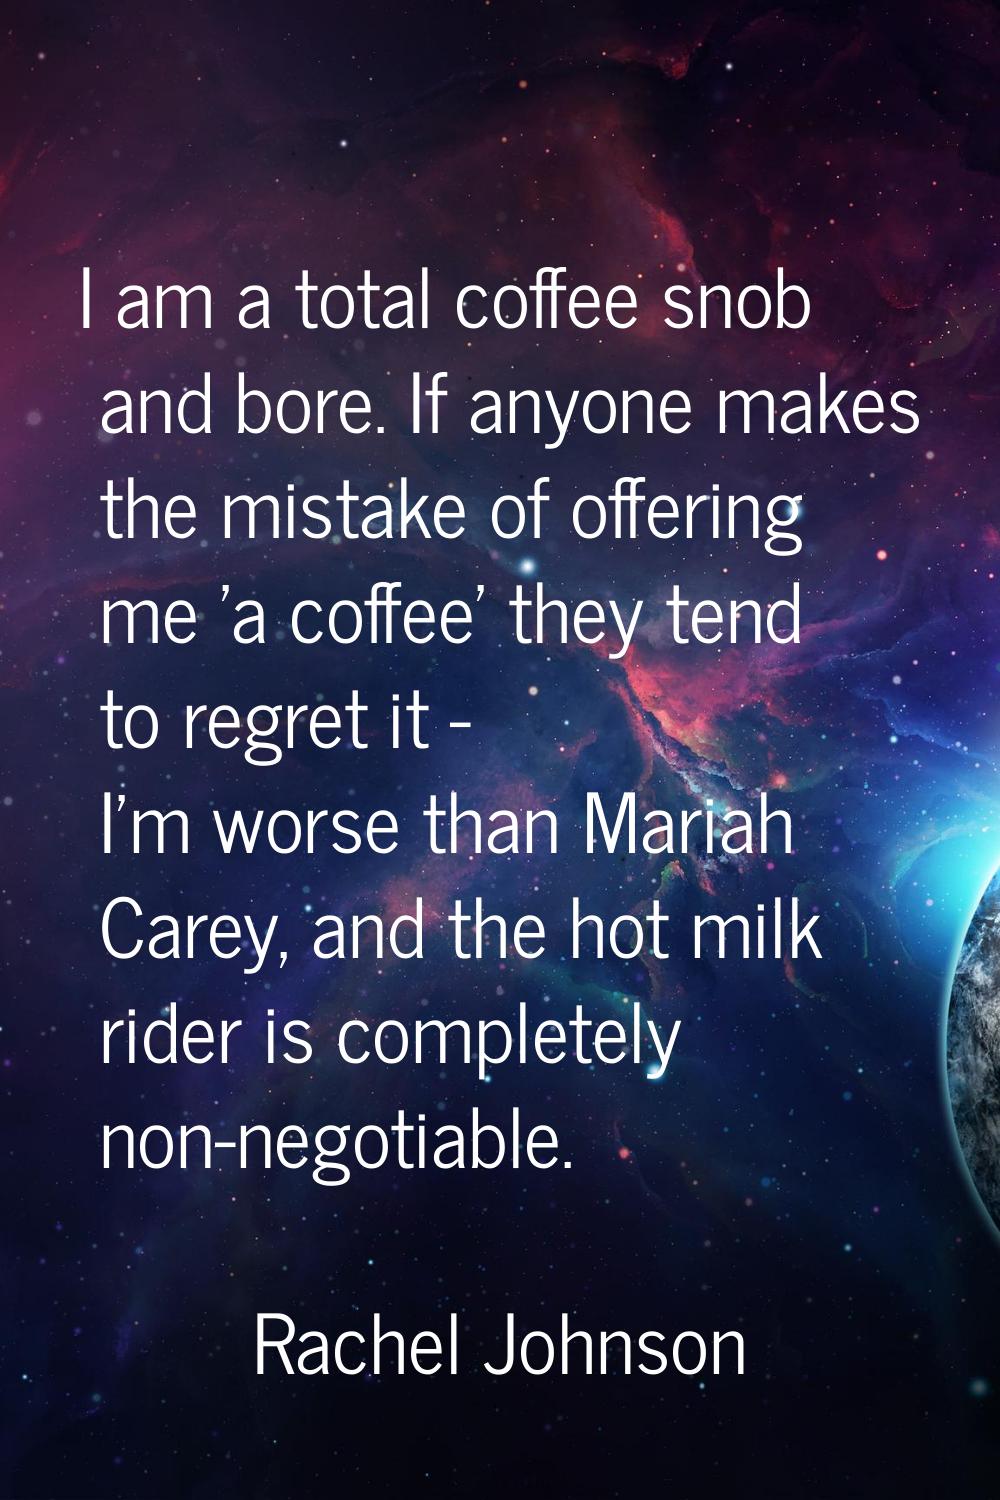 I am a total coffee snob and bore. If anyone makes the mistake of offering me 'a coffee' they tend 